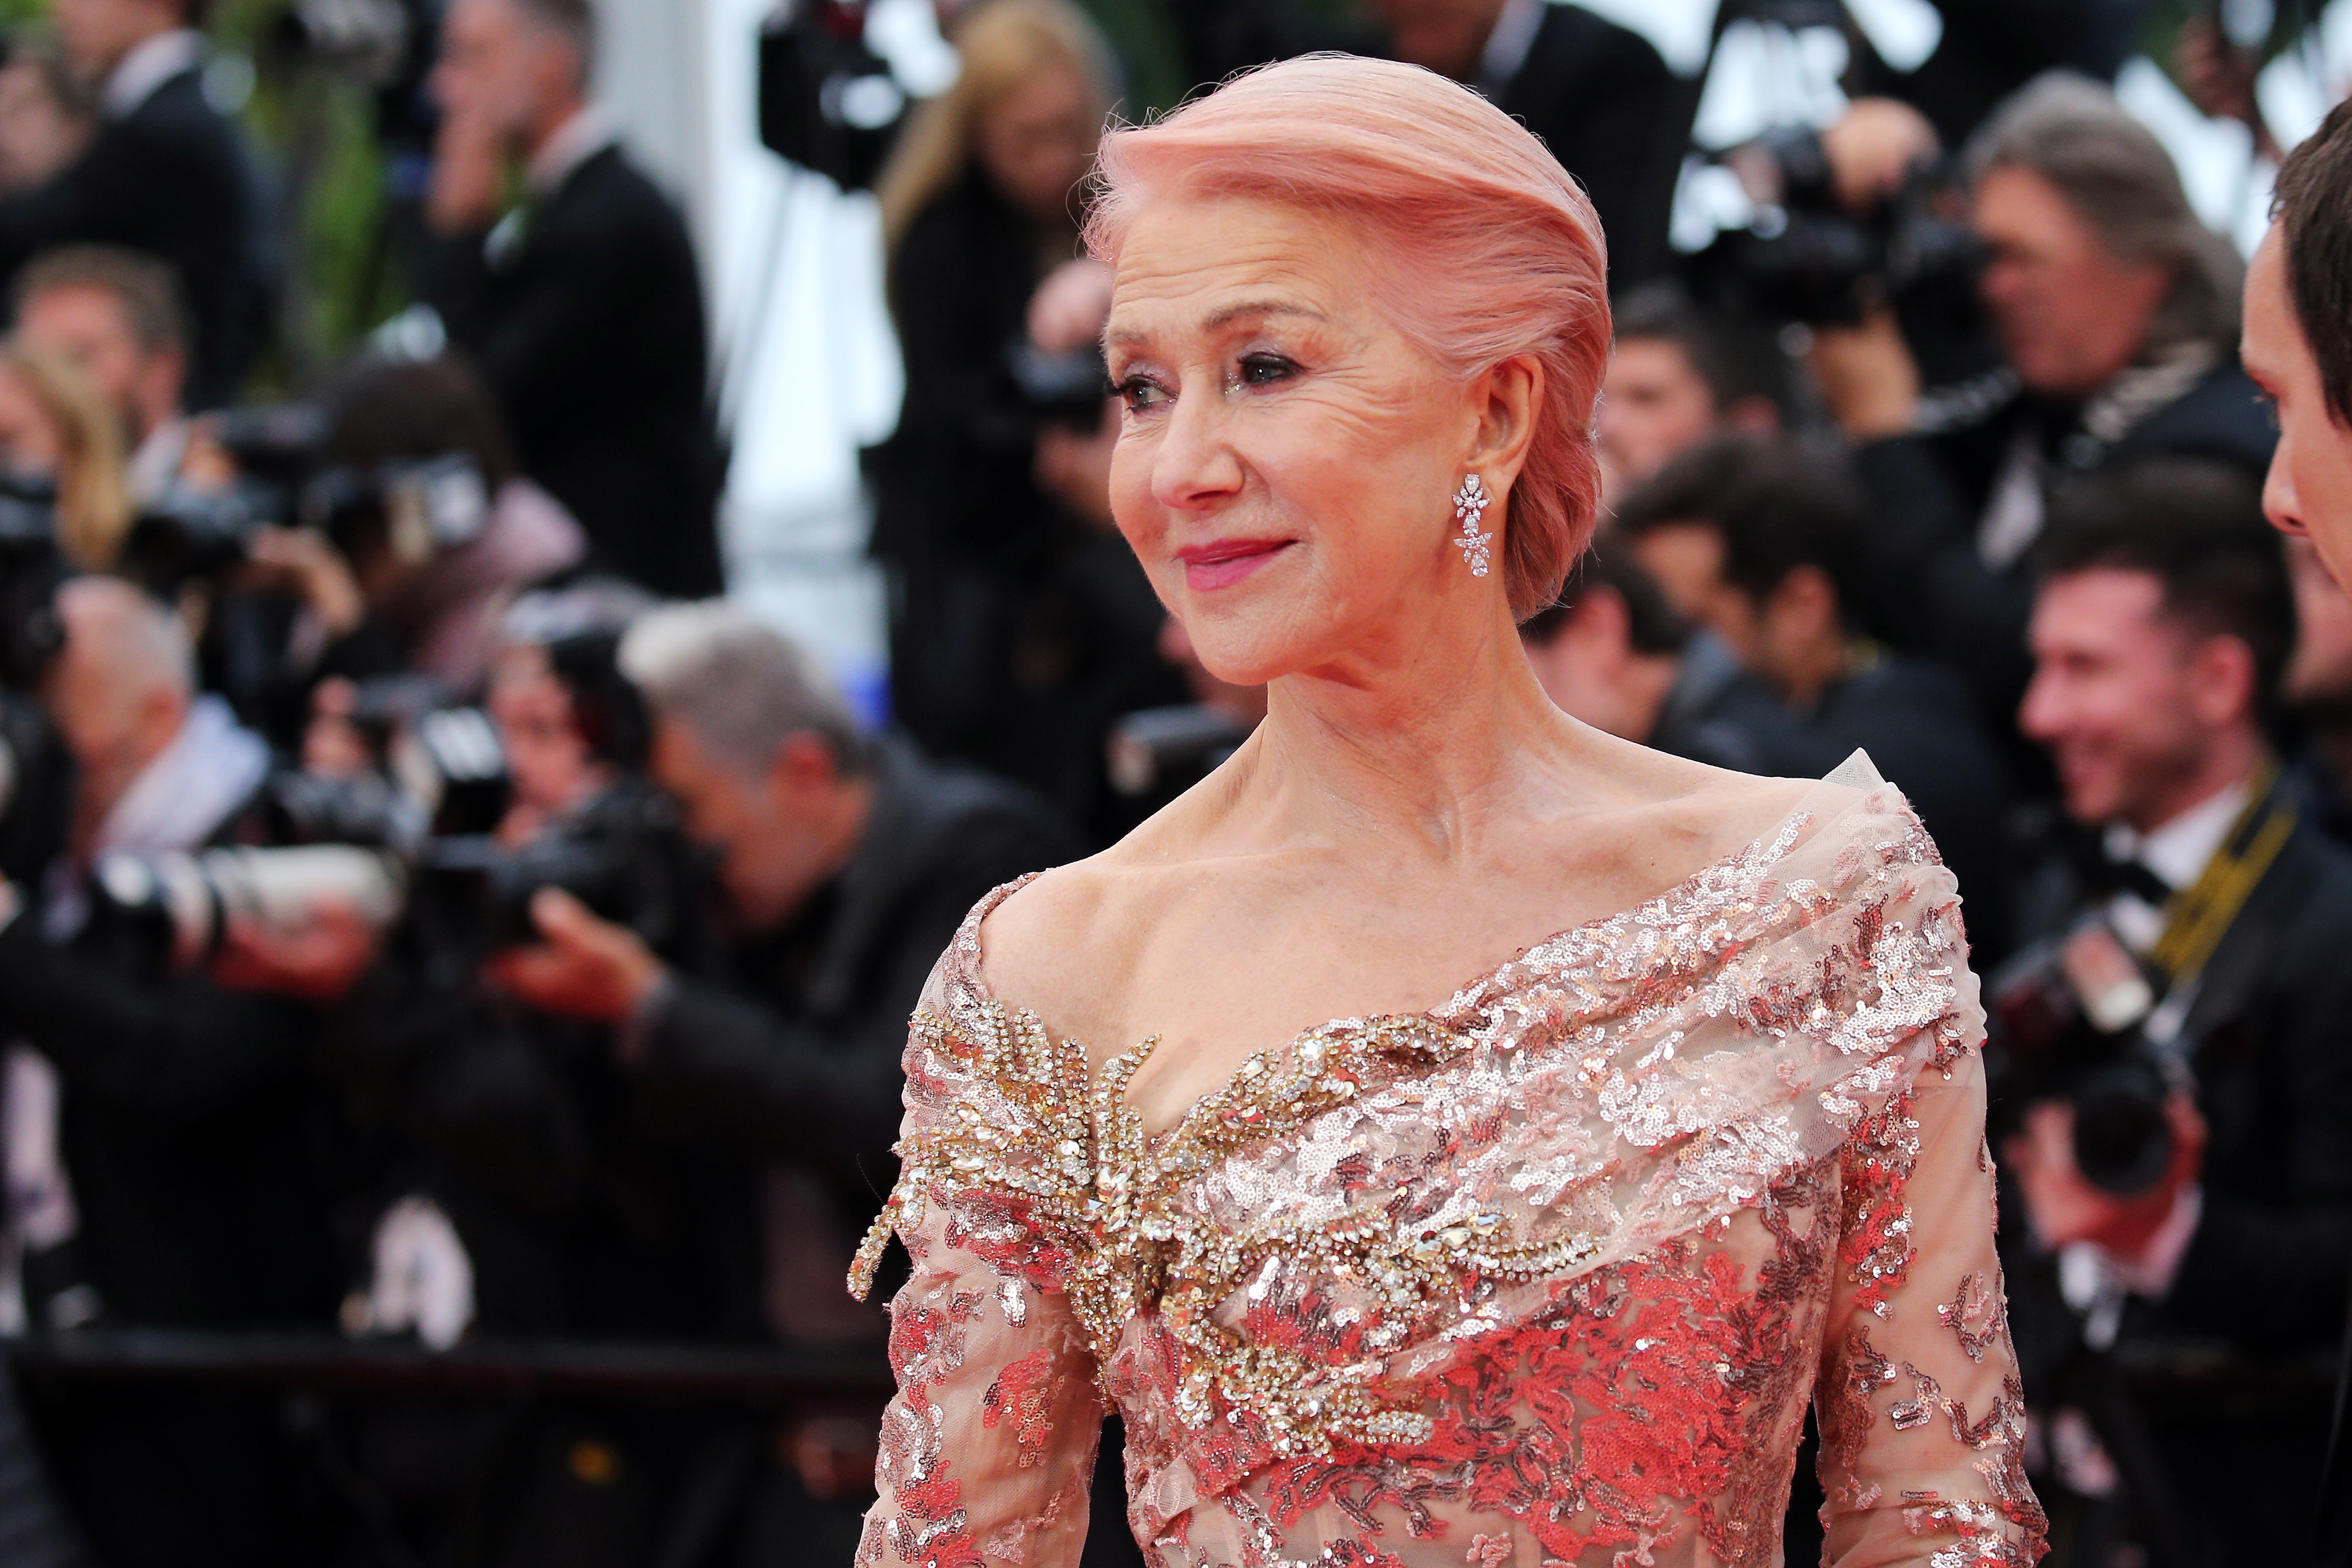 Helen Mirren on May 18, 2019, in Cannes, France. | Source: Getty Images